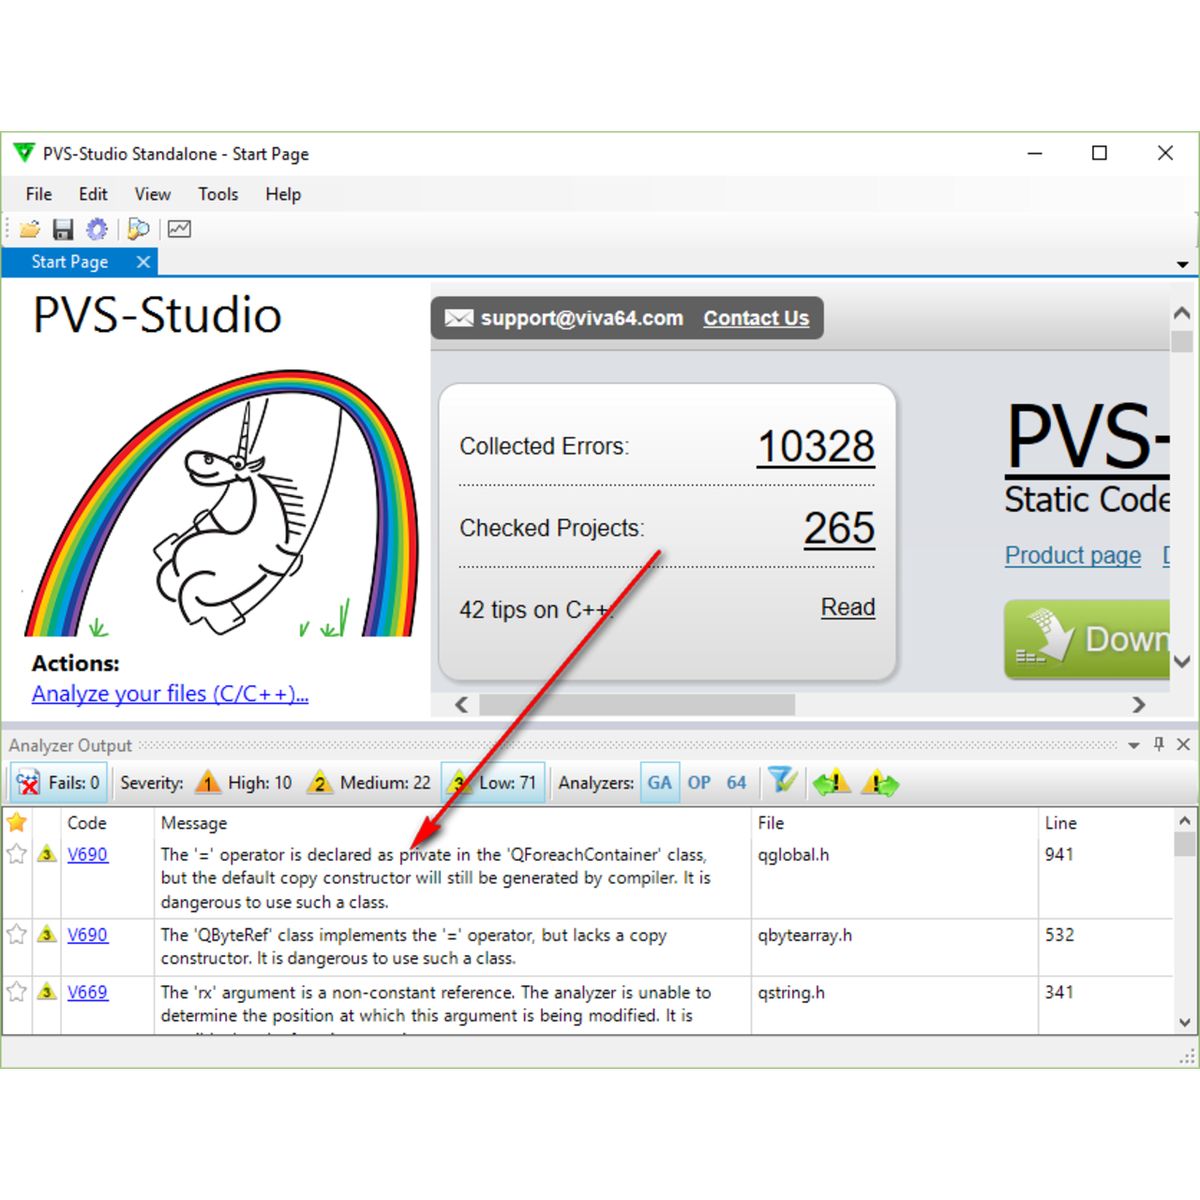 download the new version for windows PVS-Studio 7.28.78193.659